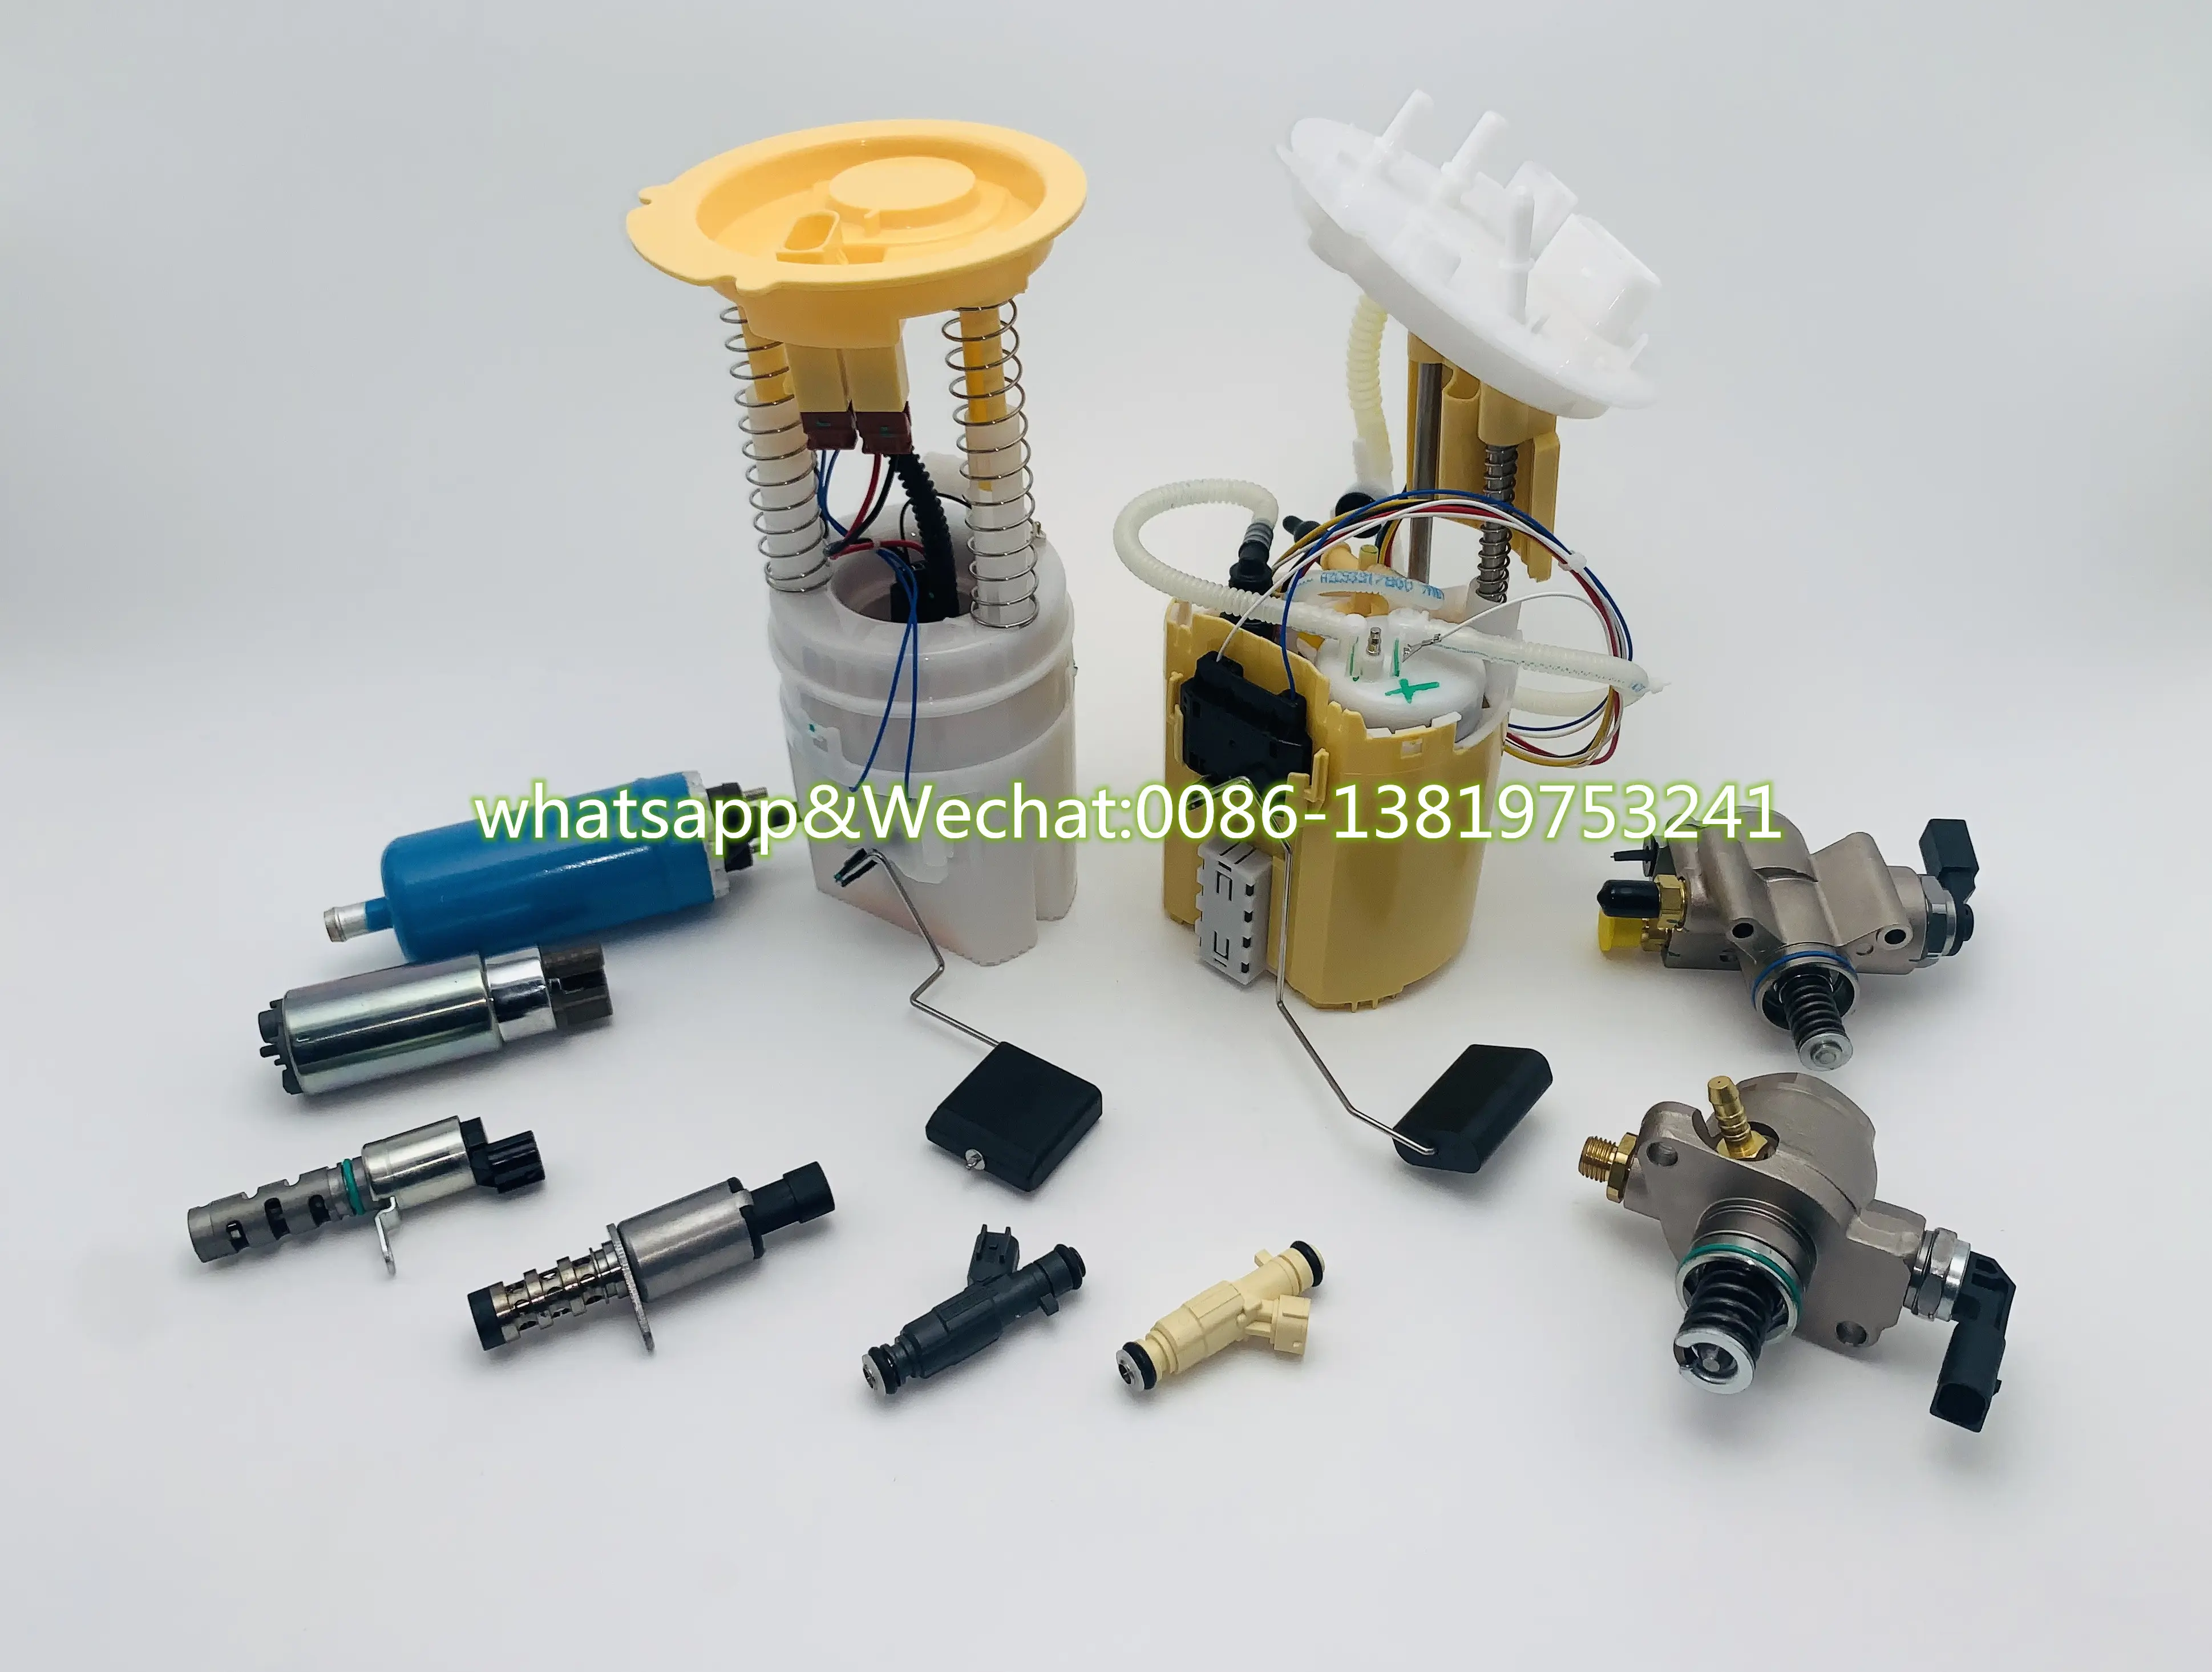 WLGRT Fuel pump assembly for Elysee Lifan 520 ZQ00469380/ 0580 310 057